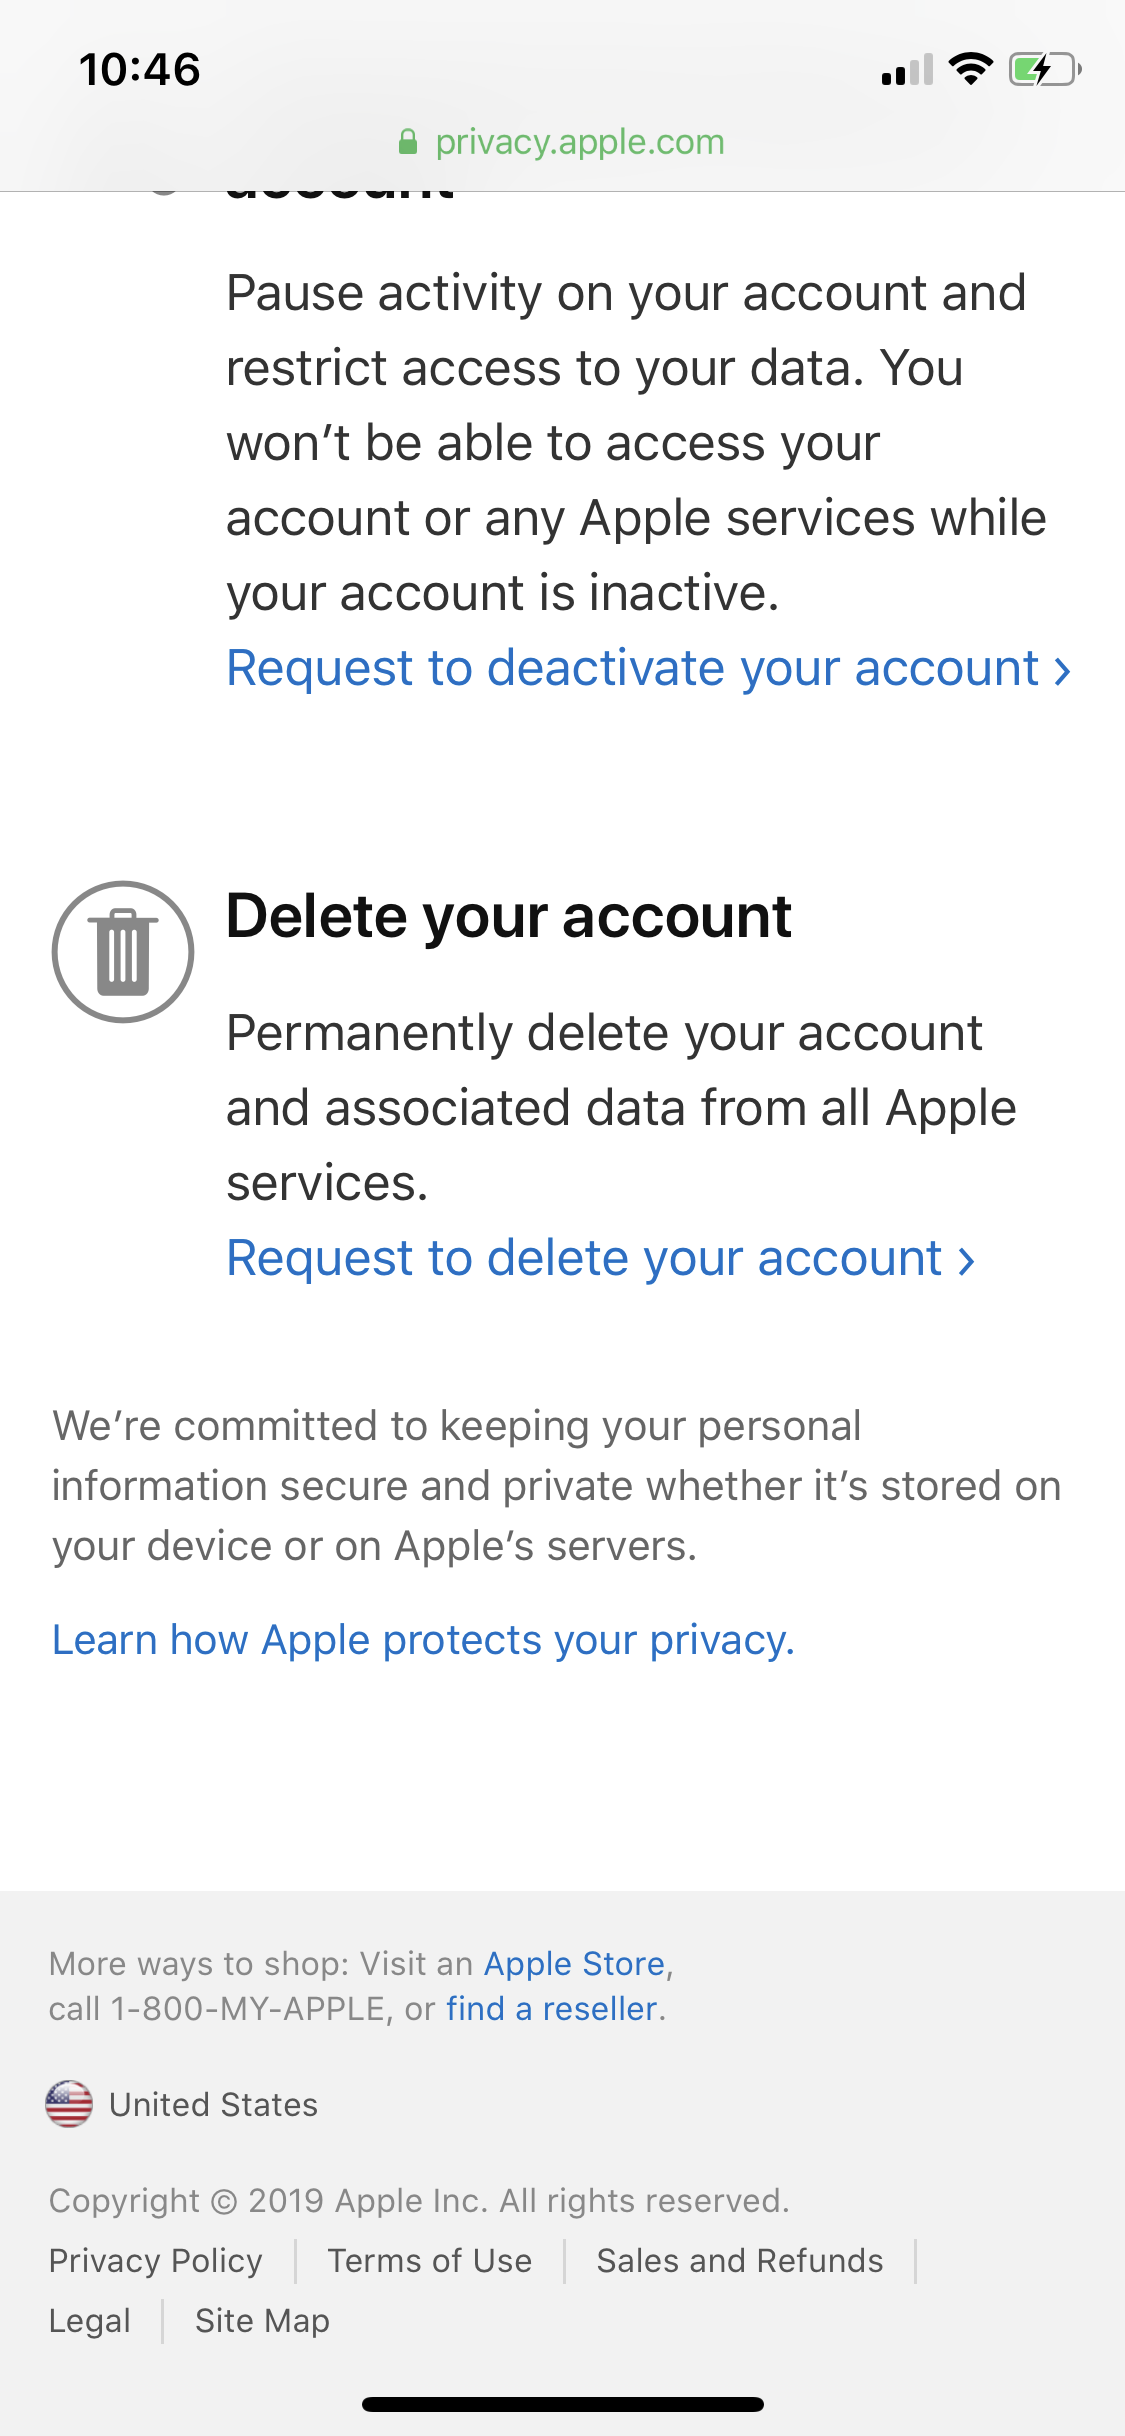 How long before Apple deletes an inactive account?